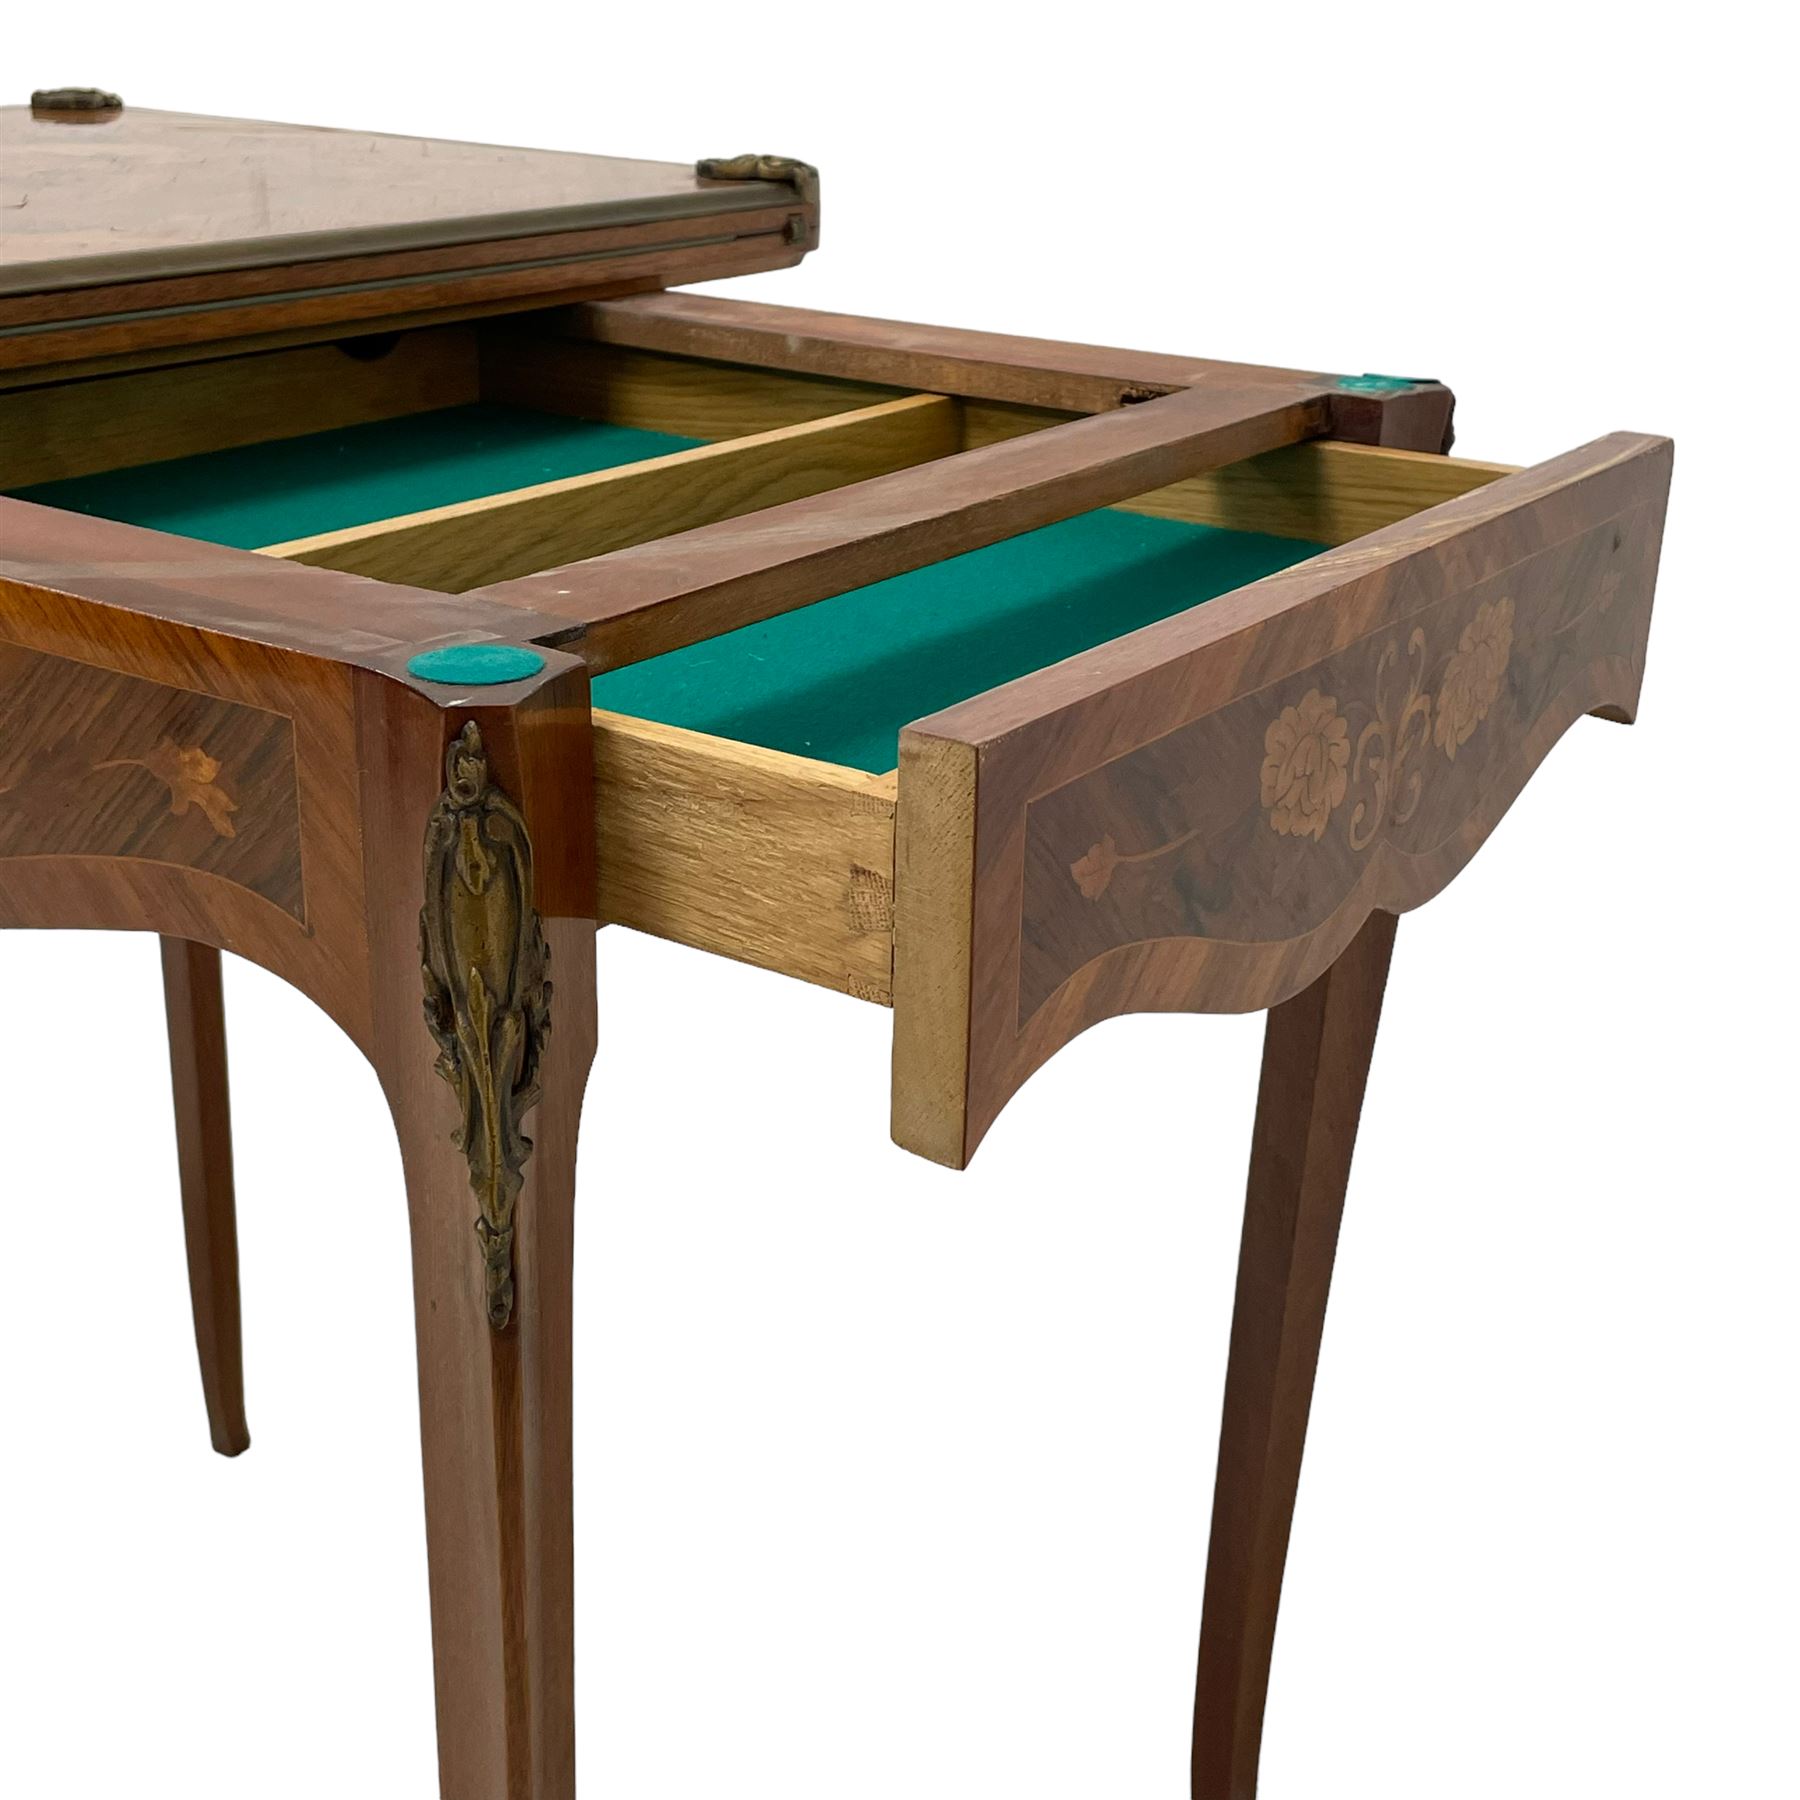 Mid-20th century Kingwood and rosewood card or games table - Image 10 of 10